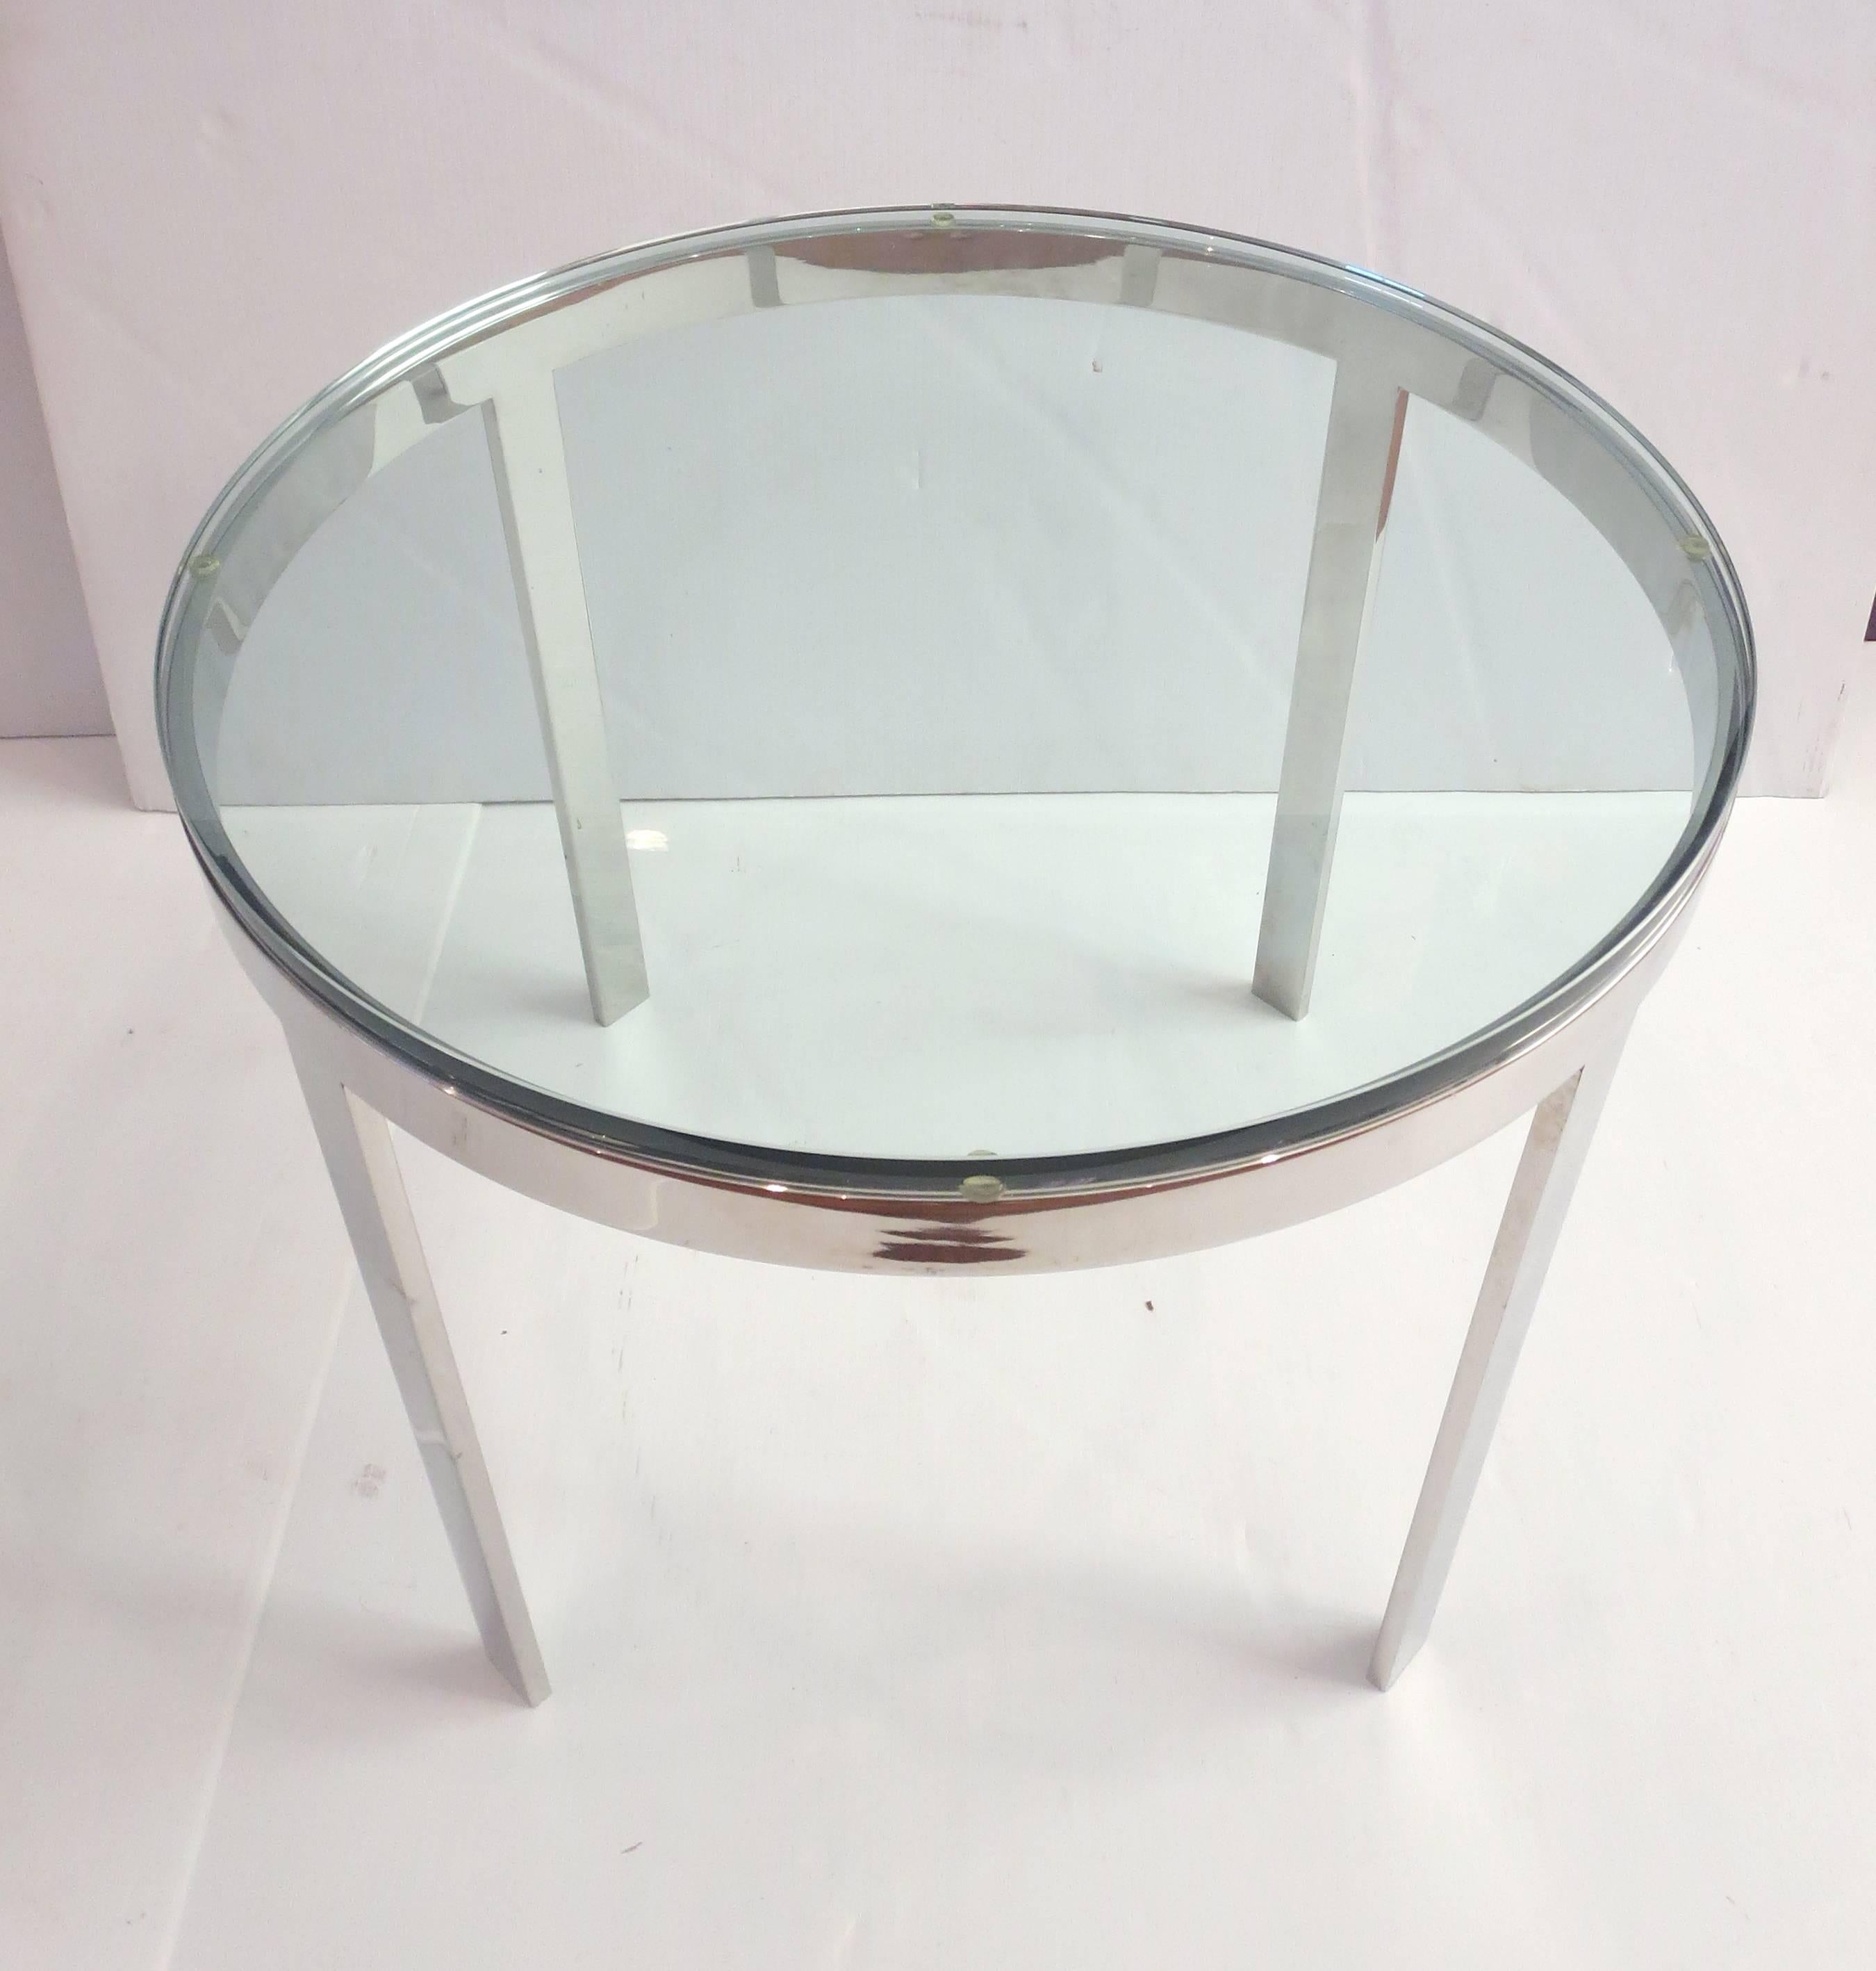 American 1970s Polished Solid Steel & Glass Cocktail Table by Nicos Zographos